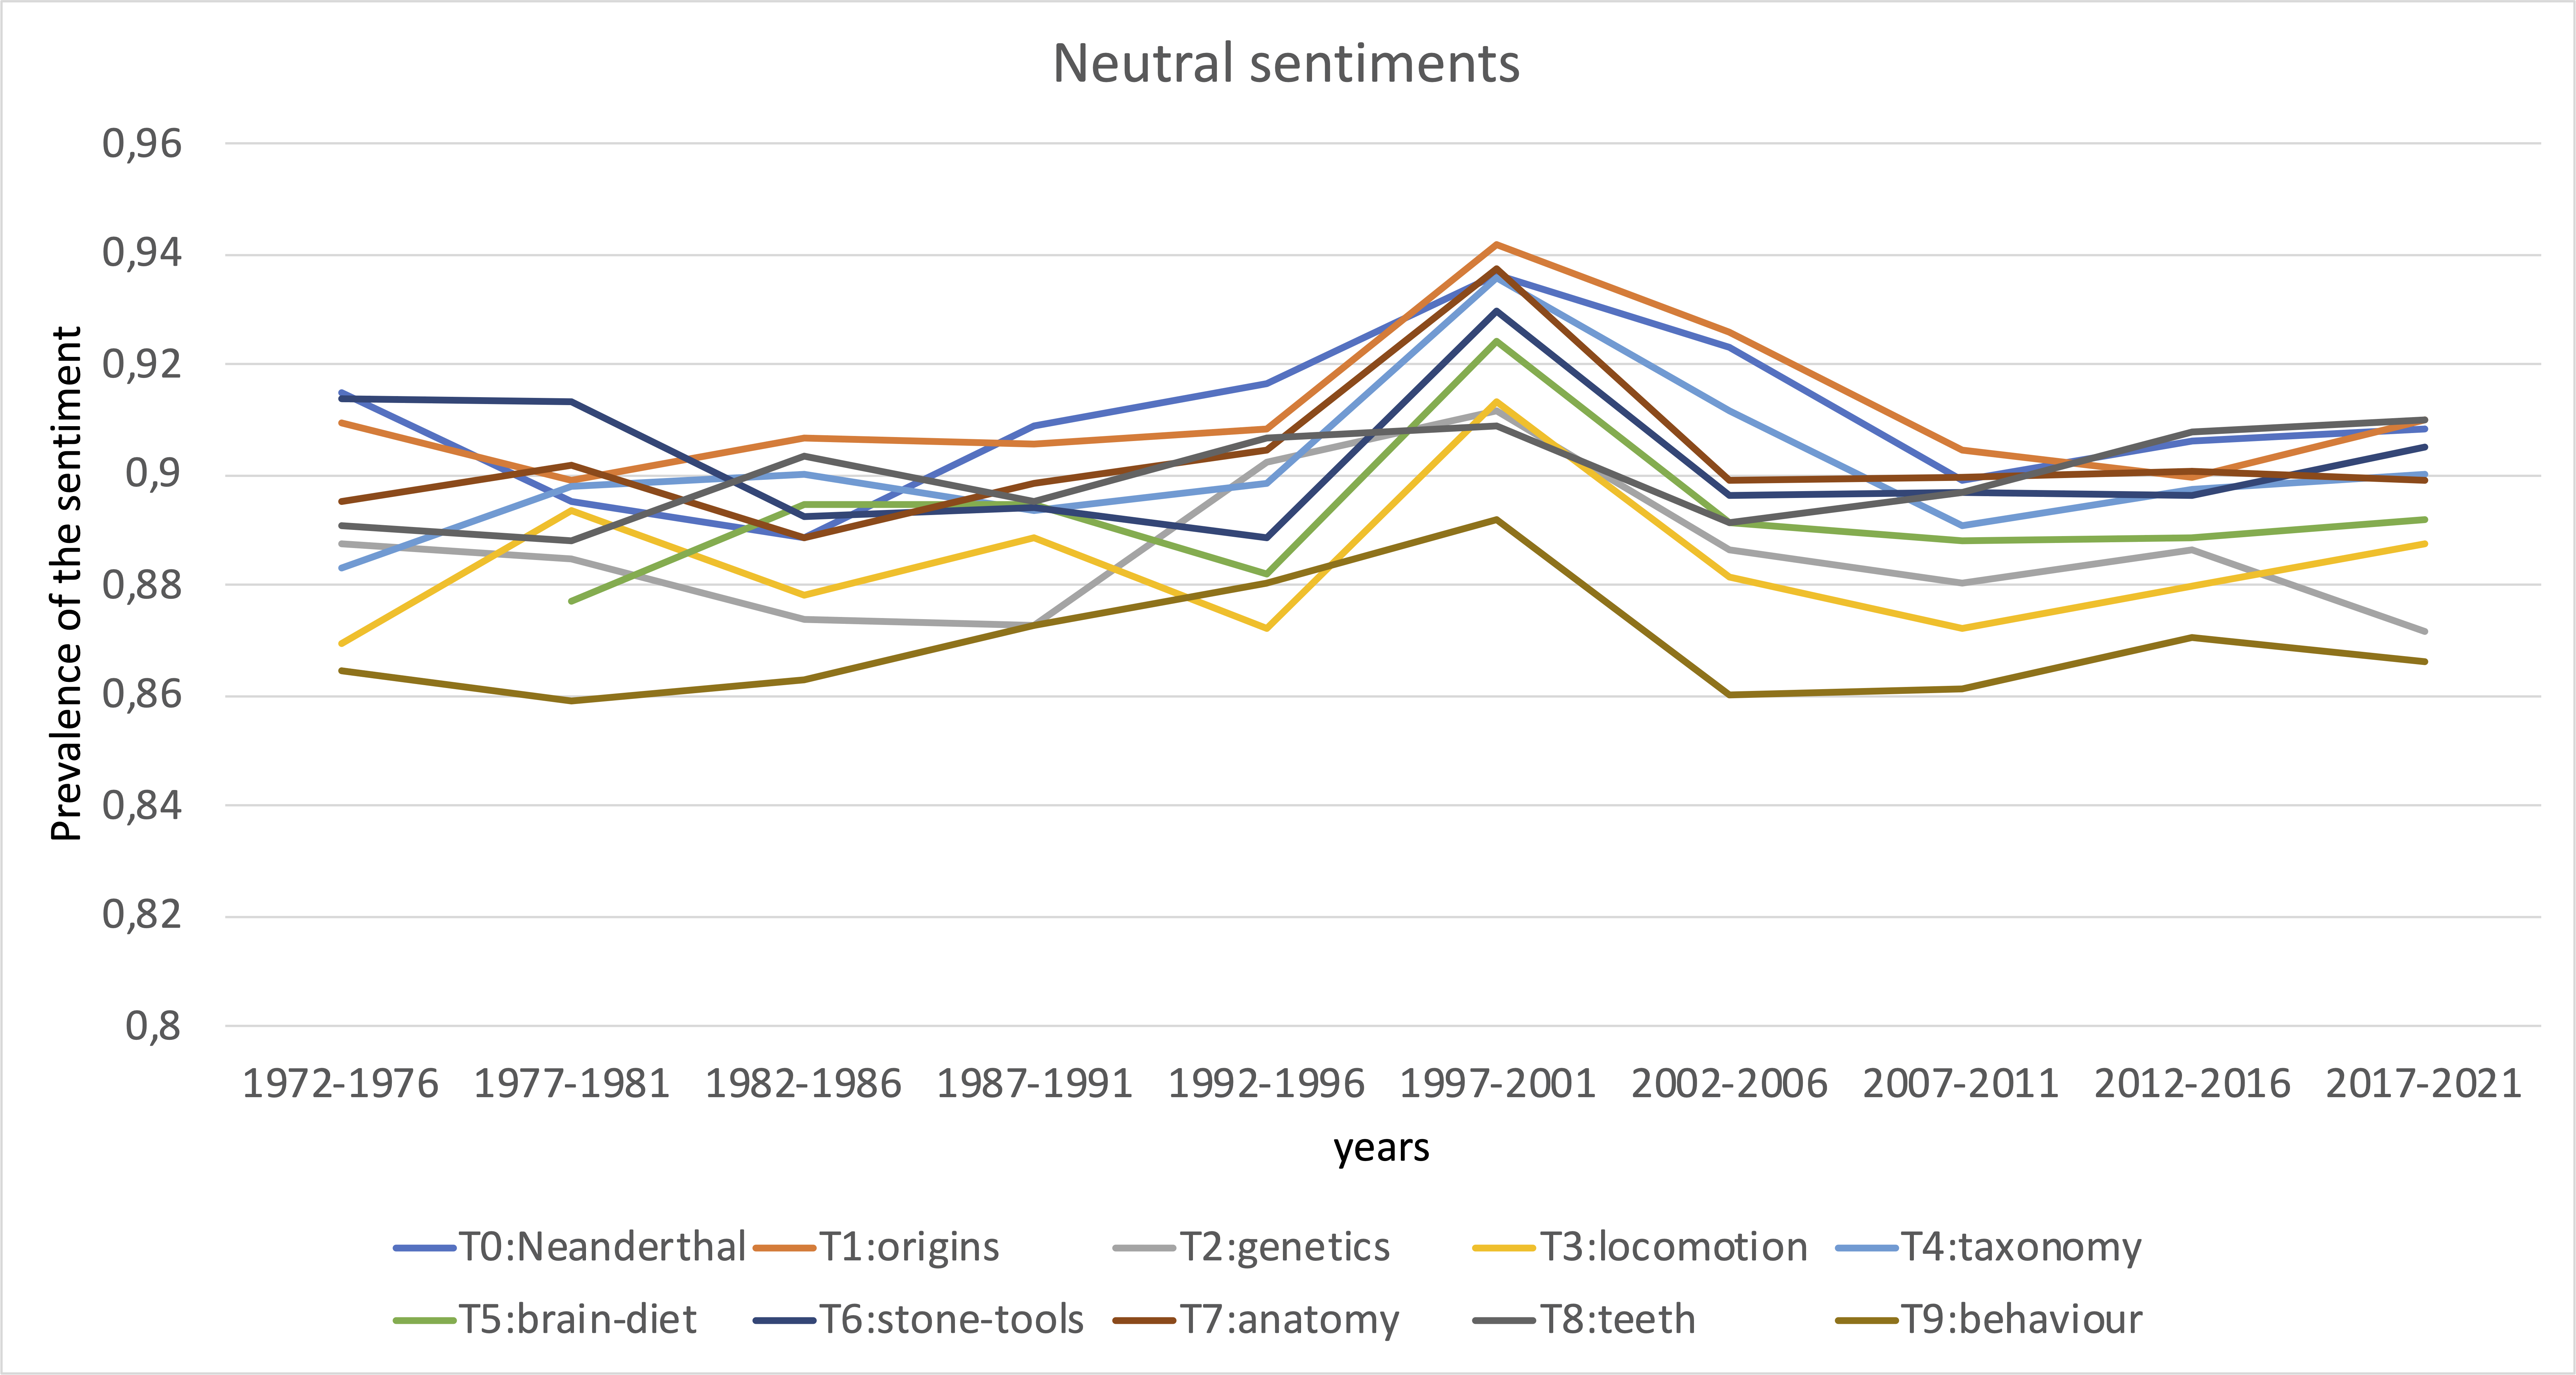 Prevalence of neutral sentiments over the years